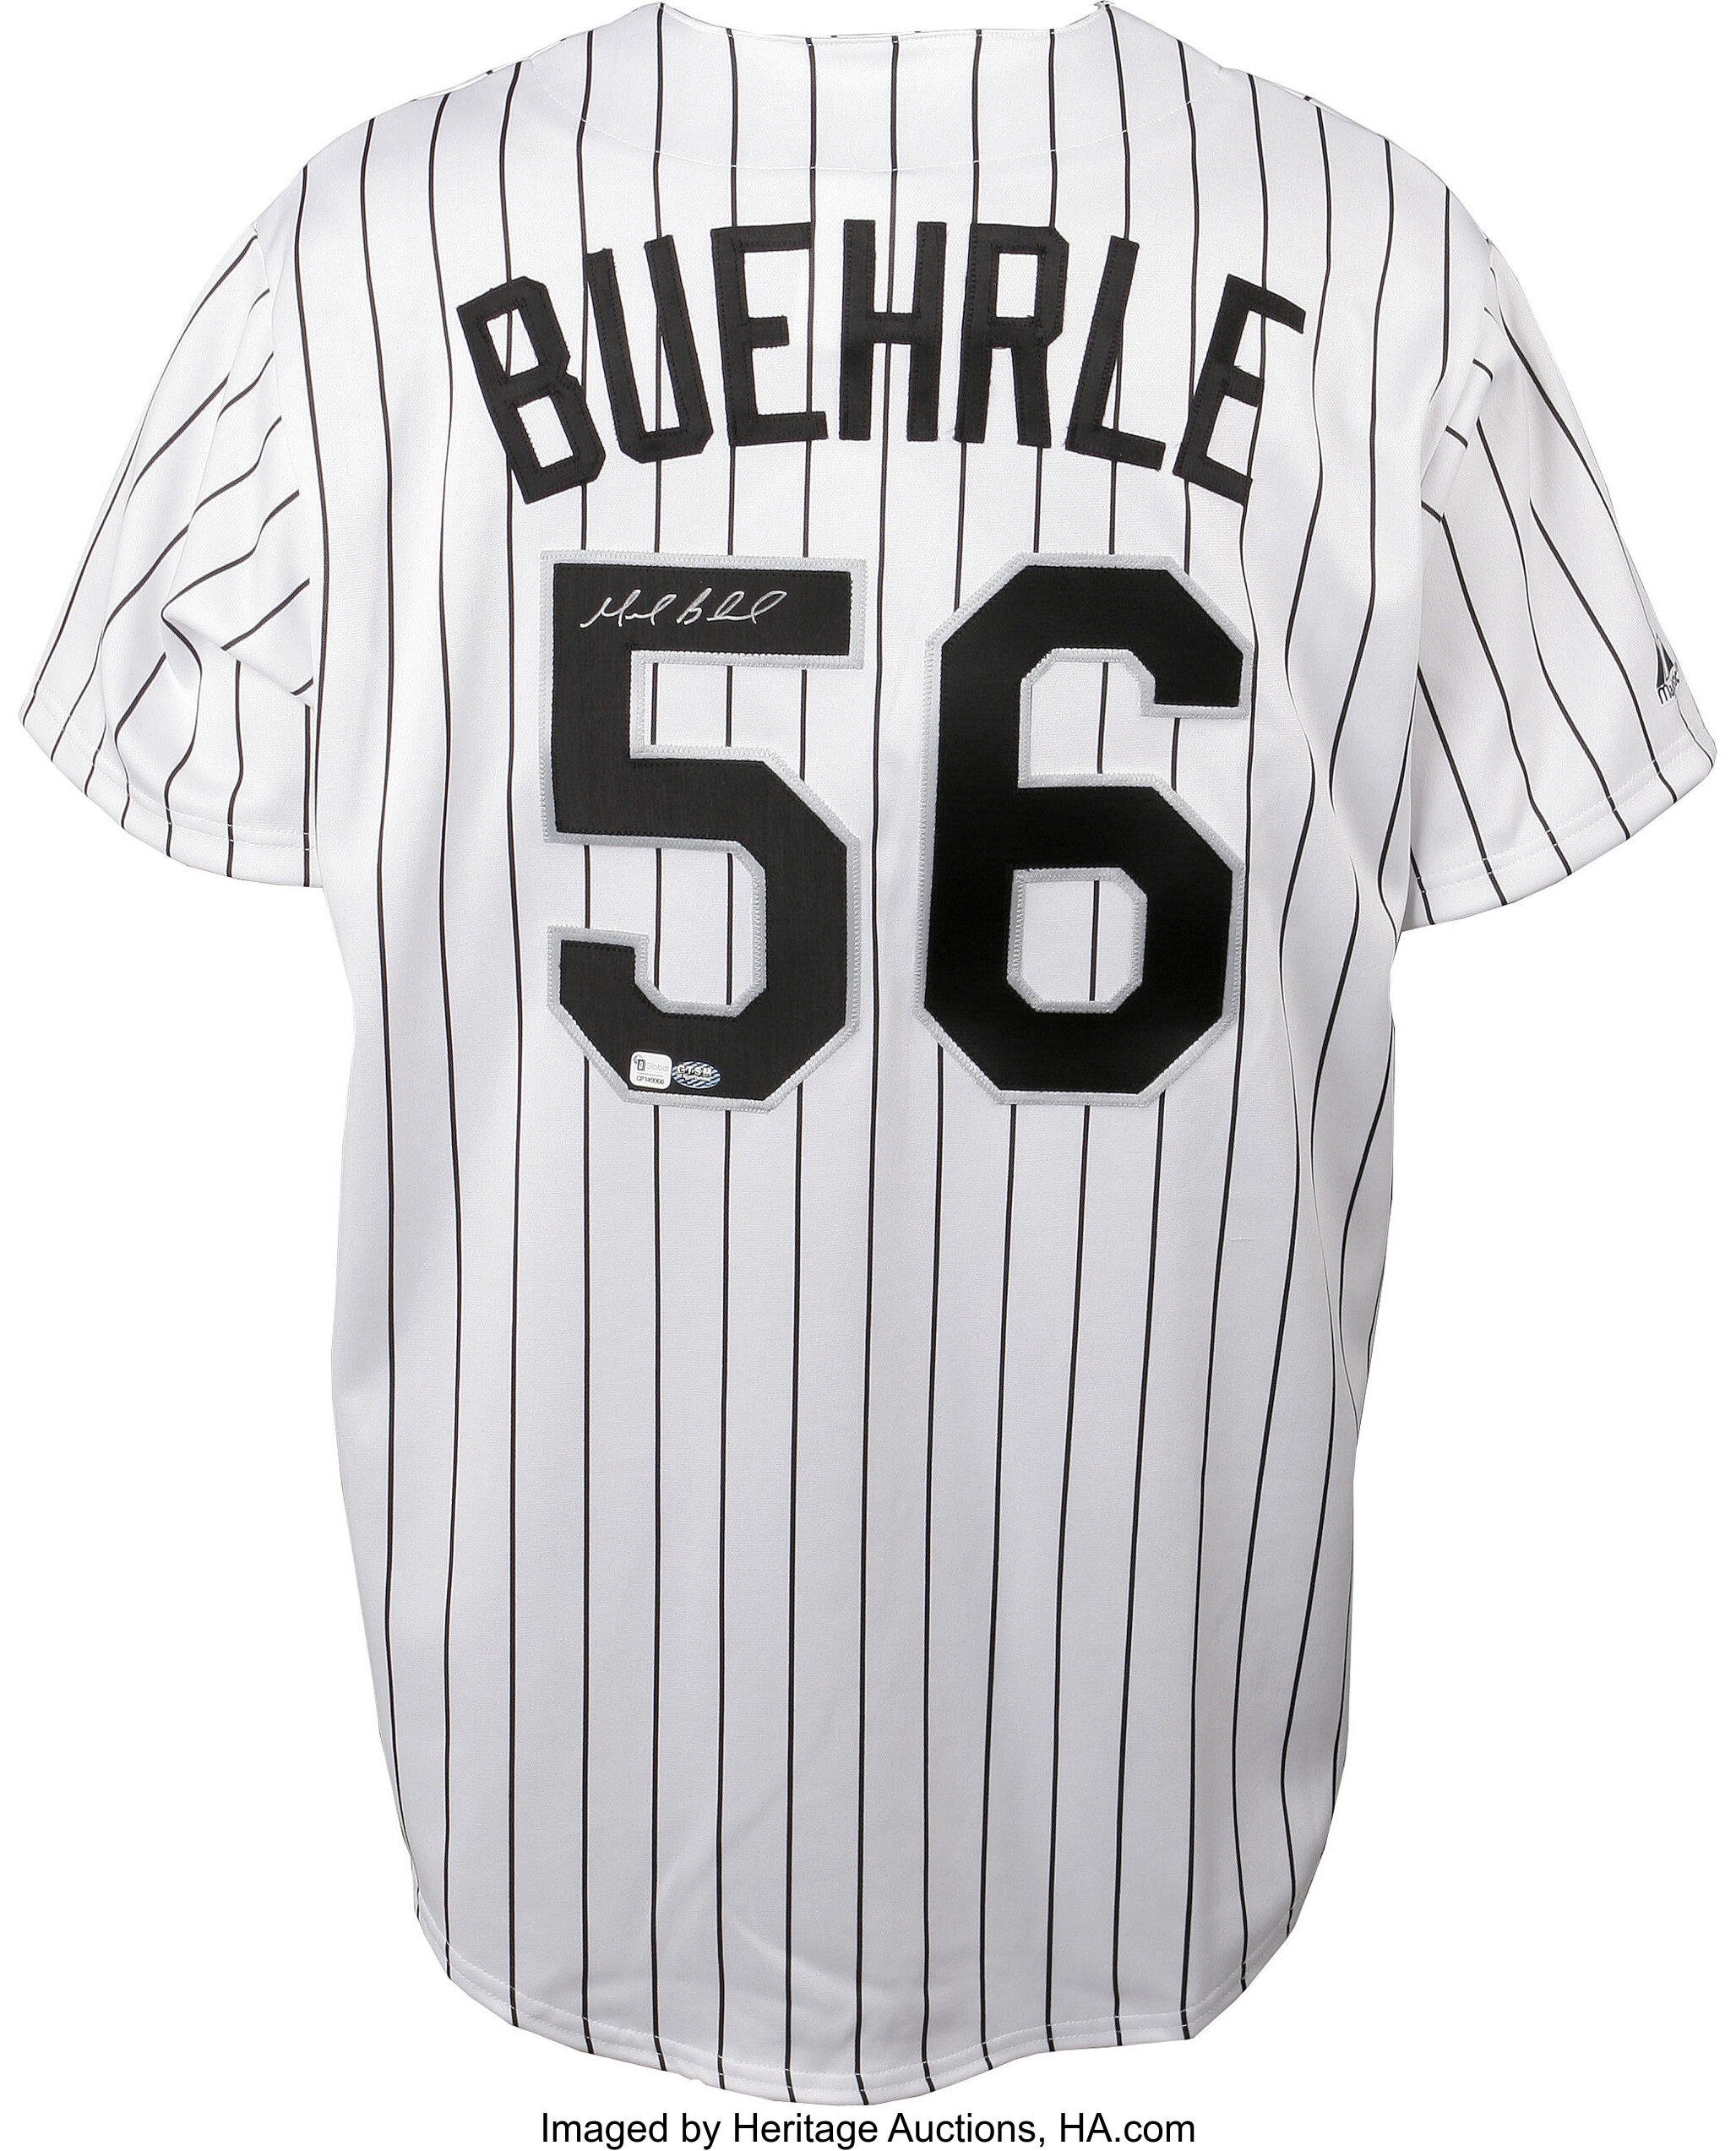 Mark Buehrle #56 Jersey Number Magnet for Sale by StickBall